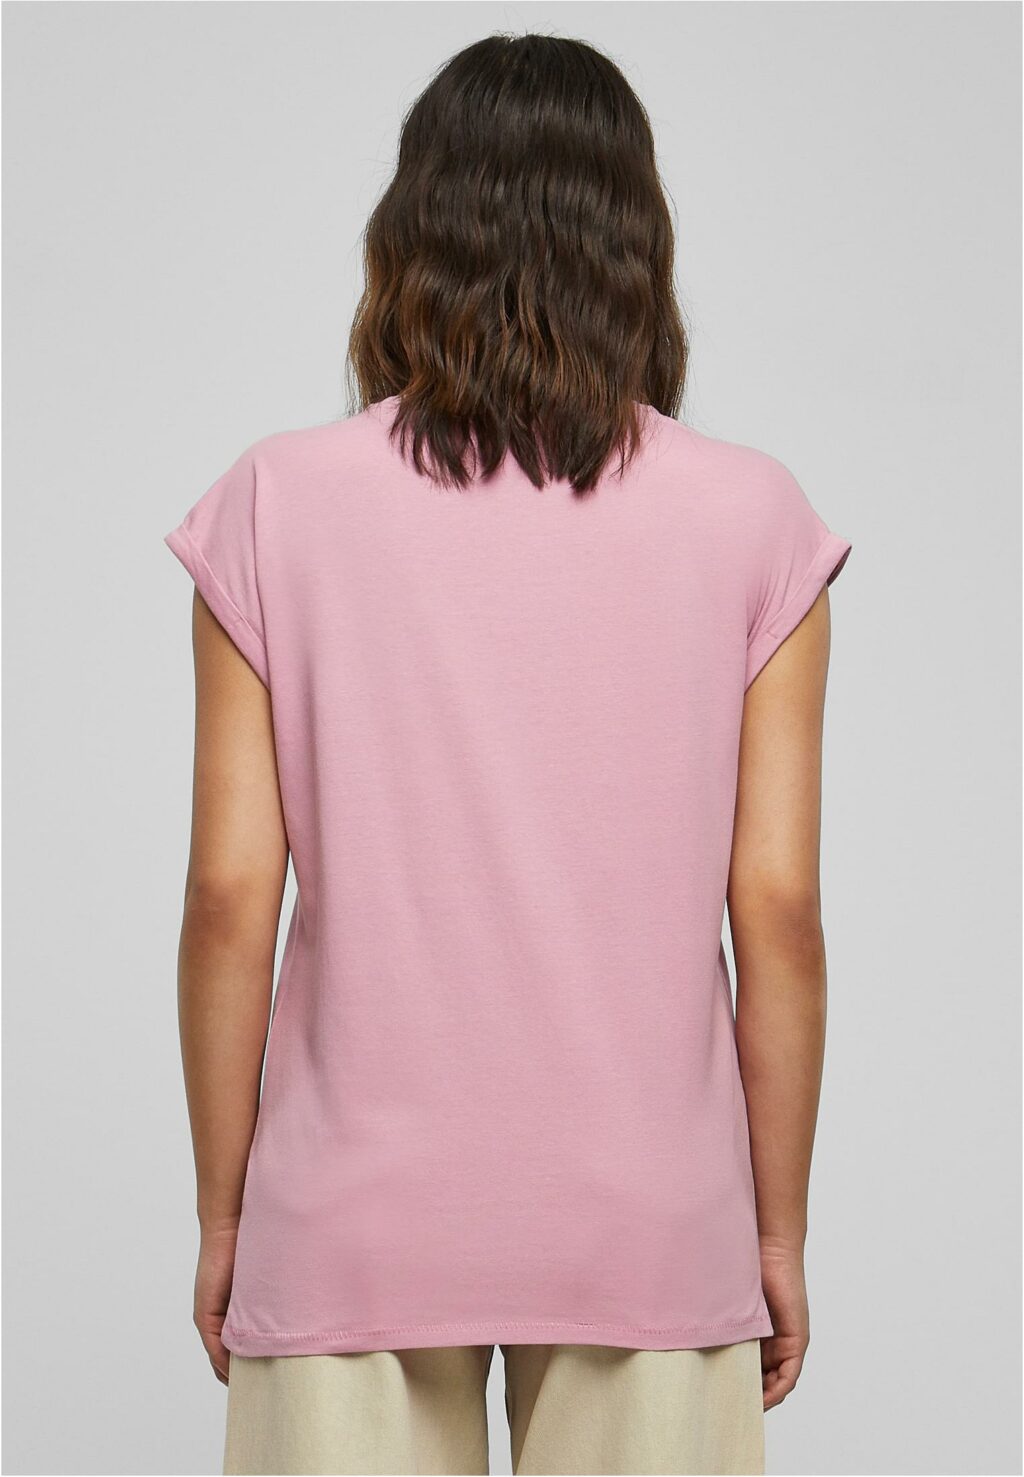 Urban Classics Ladies Extended Shoulder Tee coolpink TB771